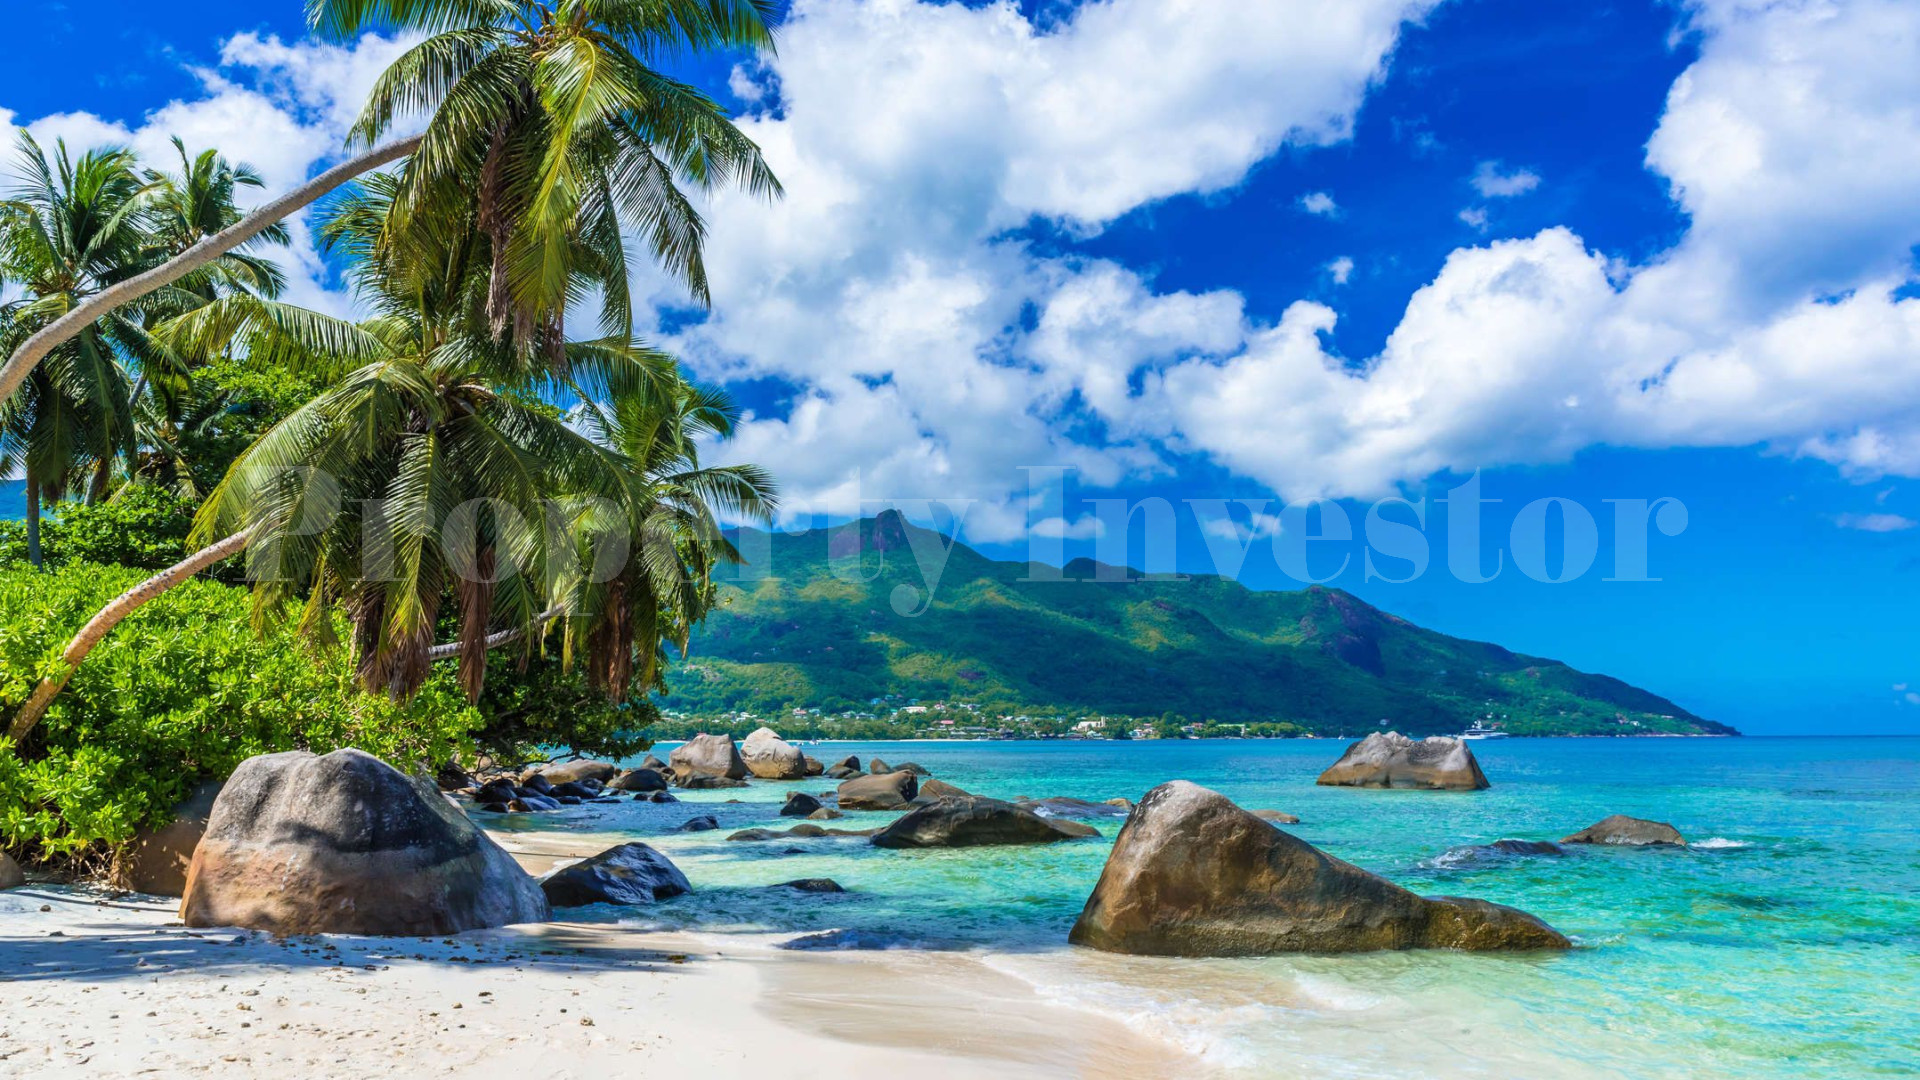 Beautiful Sea View Parcel of 4.8 Hectares of Land Overlooking Beau Vallon Beach in Seychelles